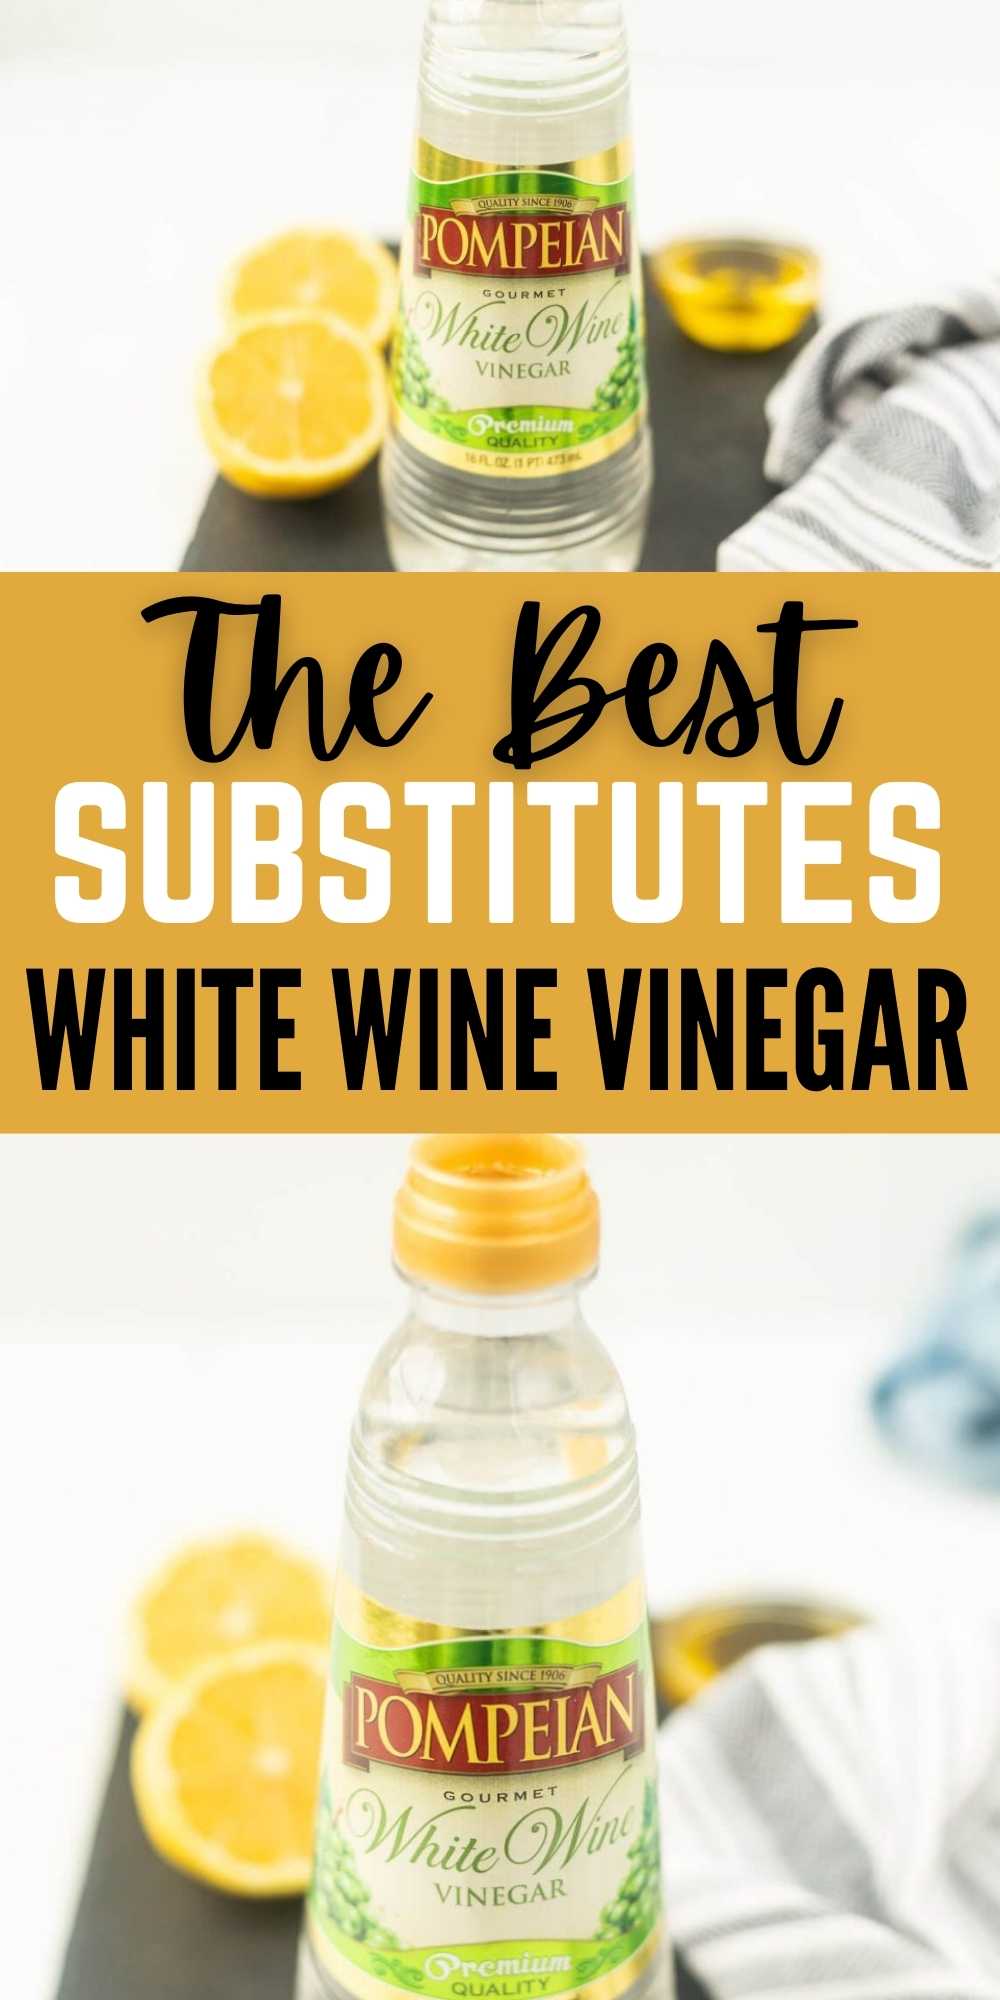 We have gathered the Best White Wine Vinegar Substitutes when you have discovered you are out. Easy substitutes to save your recipe. You’ll love these easy substitutions ideas for white wine vinegar. #eatingonadime #whitewinevinegar #substitutuions #ingredientsubstitutions 
